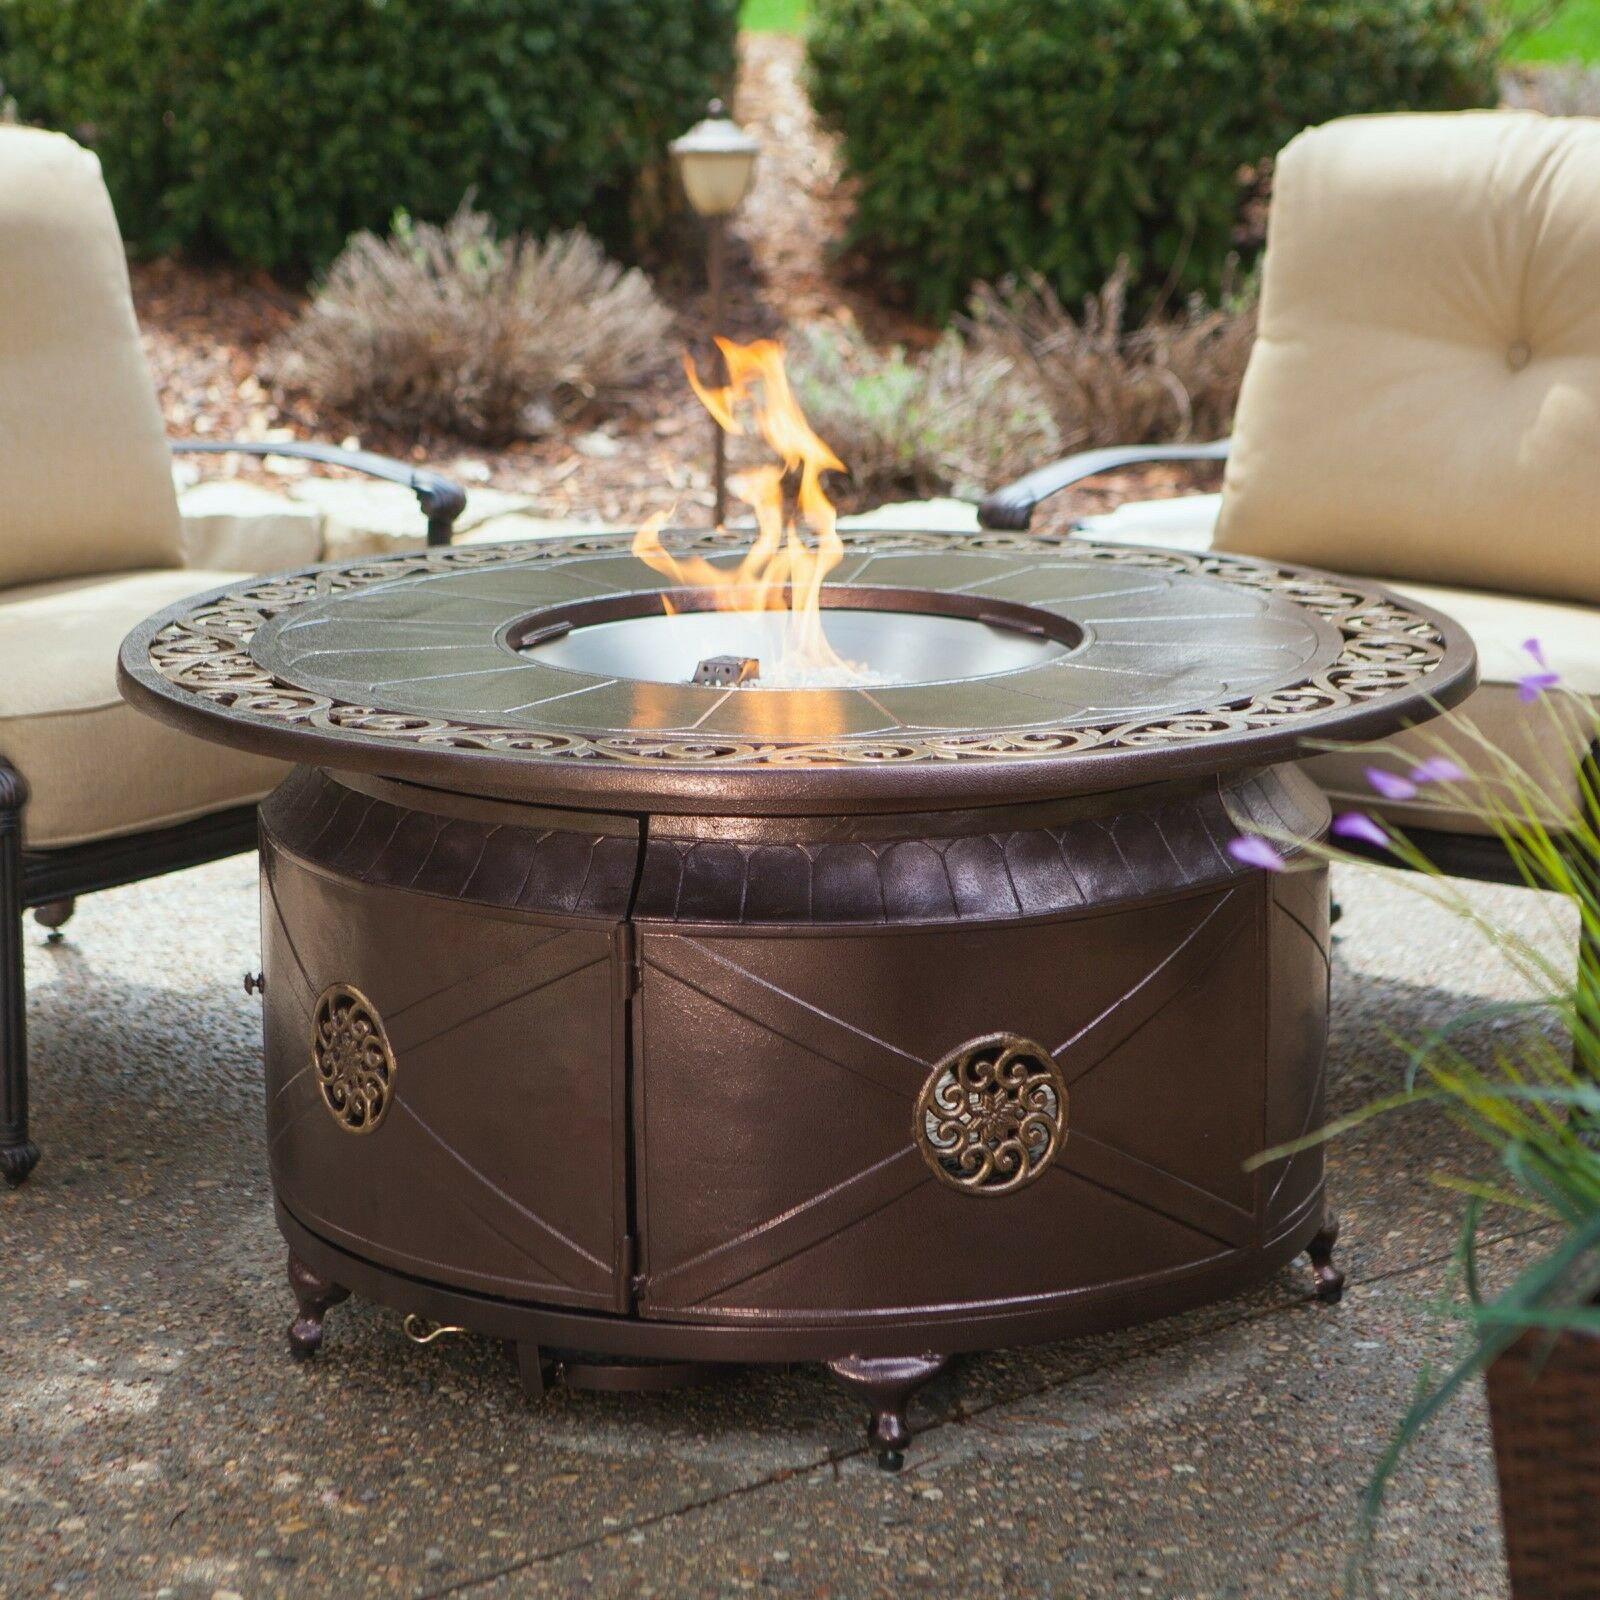 Outdoor Fire Pit Table
 Fire Pit Table Burner Patio Deck Outdoor Fireplace Propane